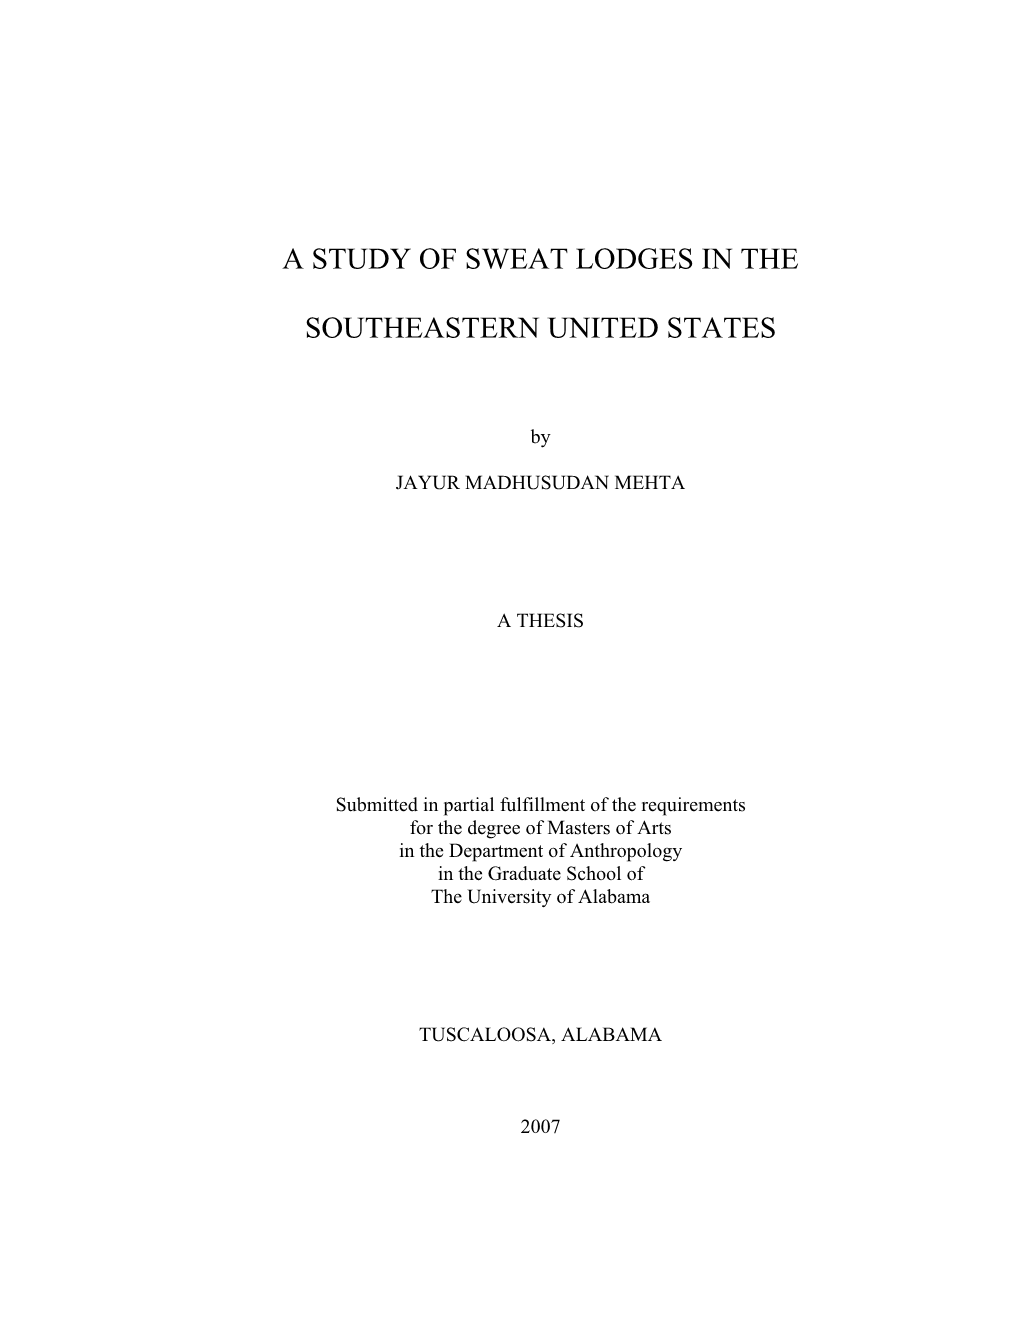 A Study of Sweat Lodges in the Southeastern United